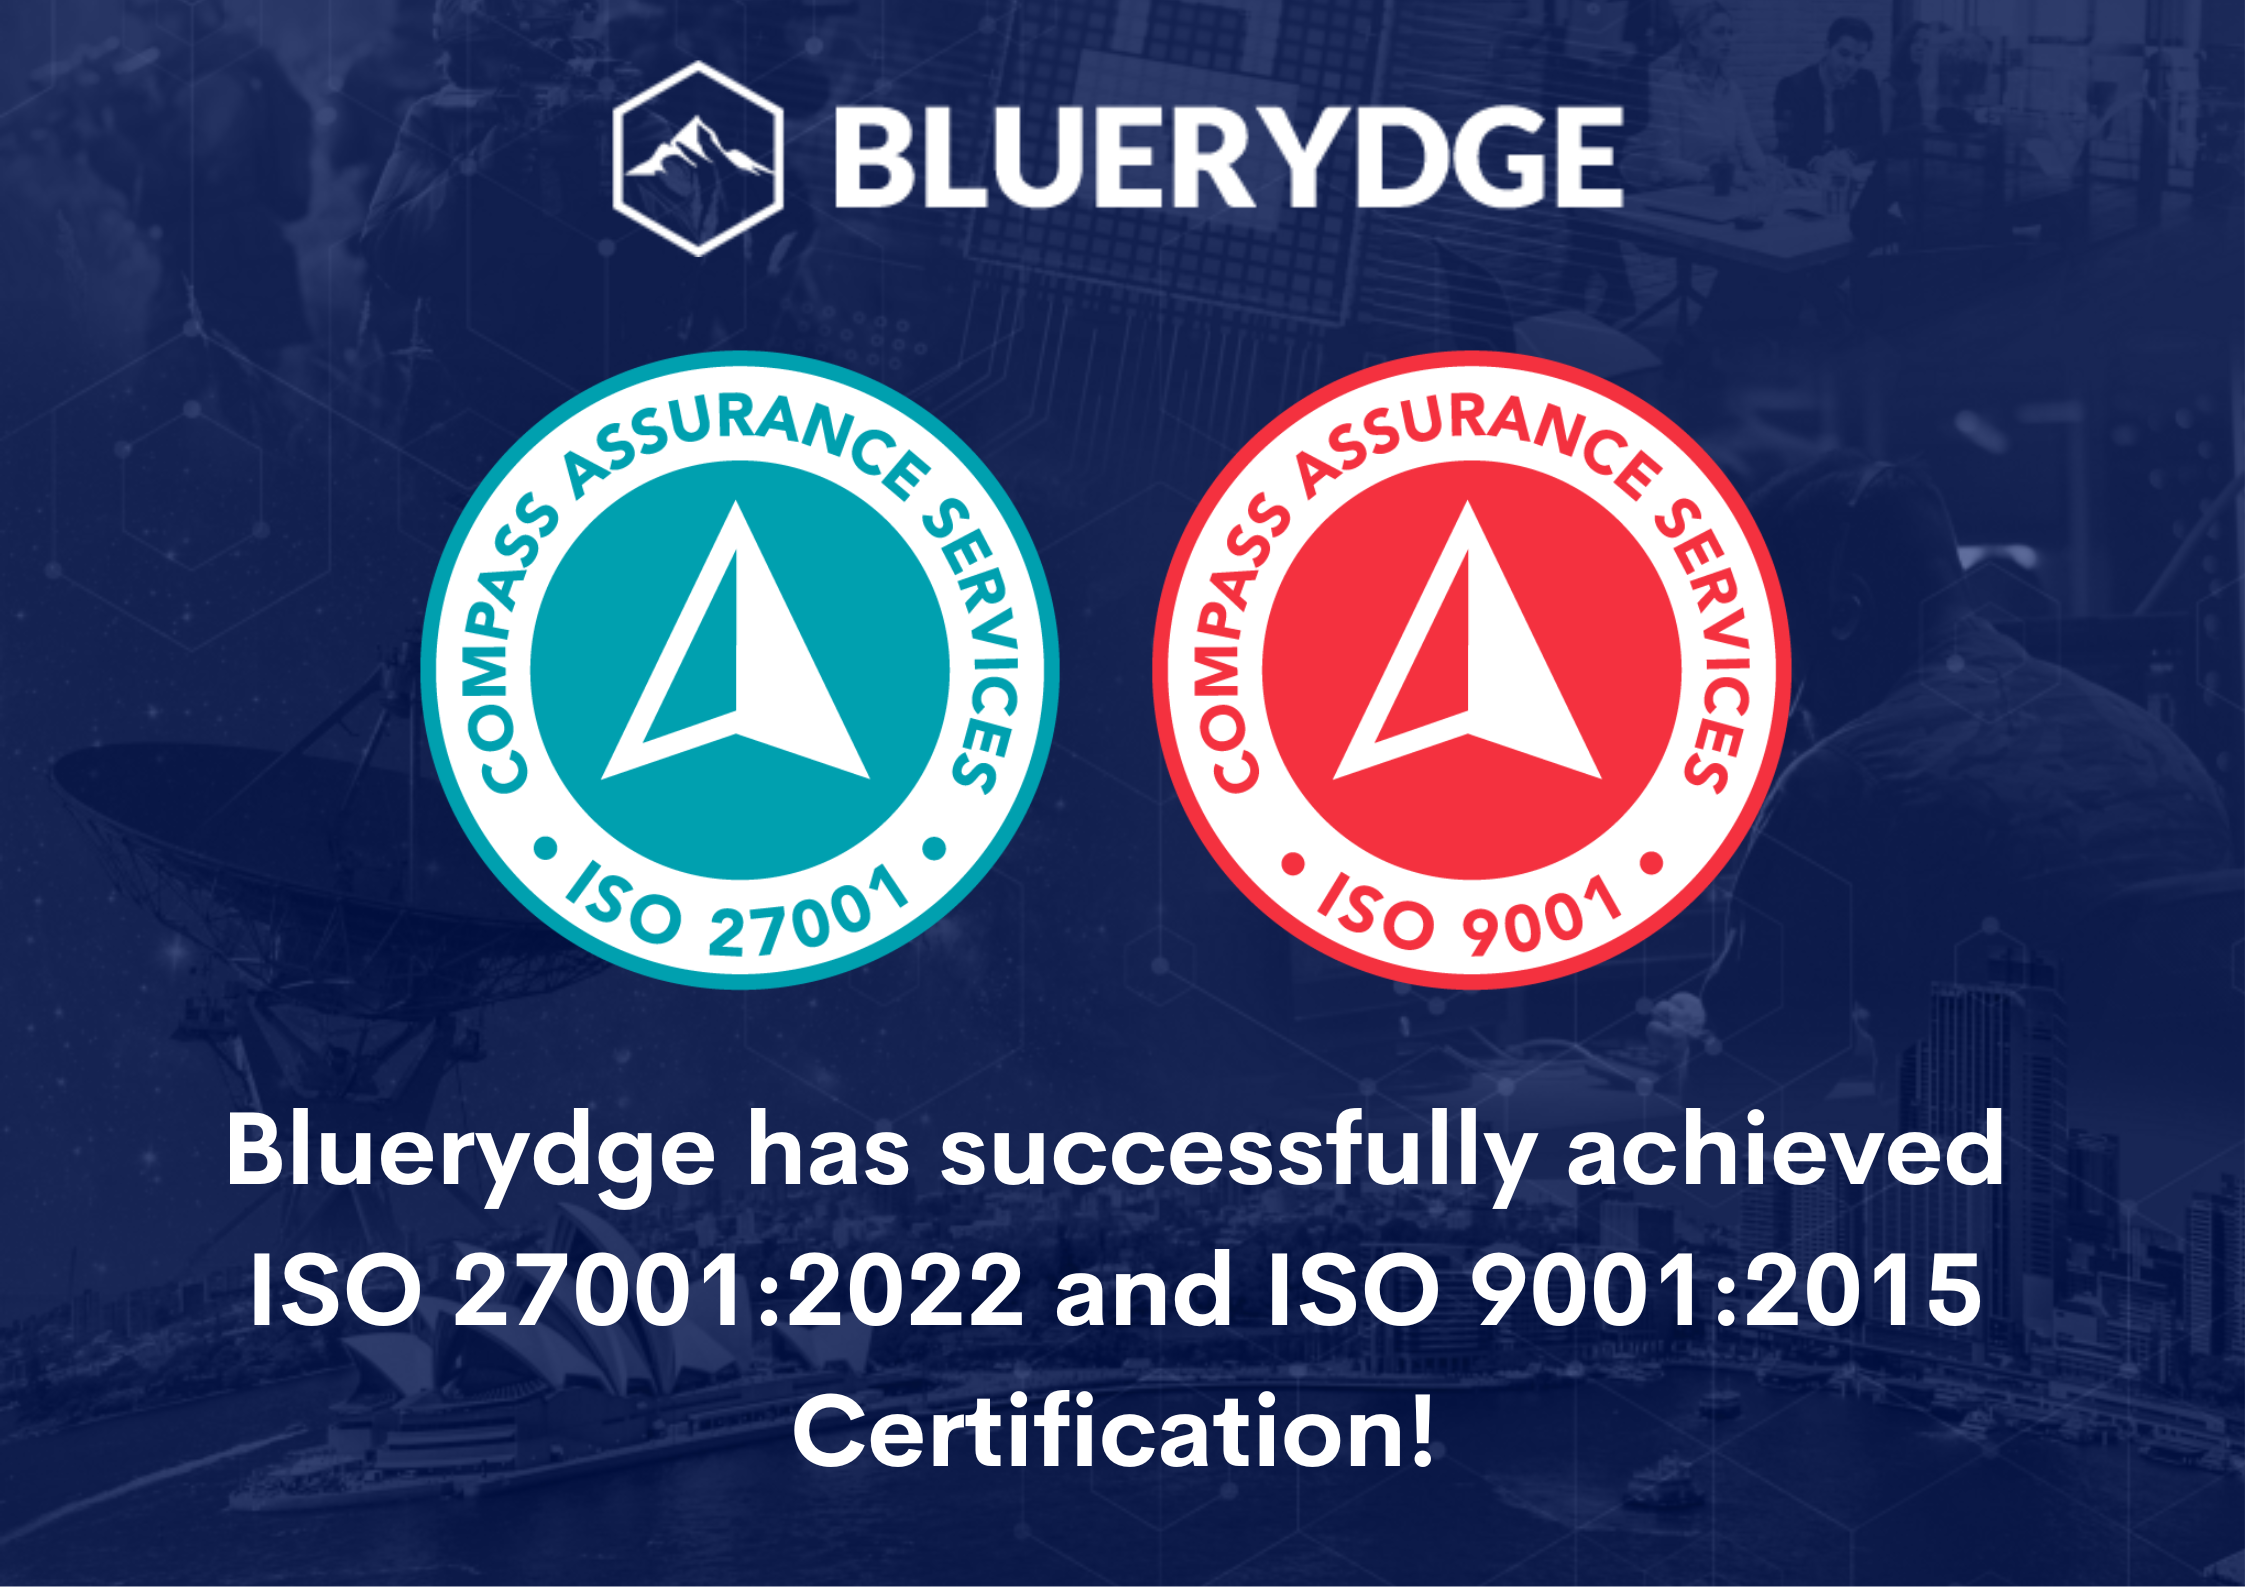 Bluerydge attains ISO 27001:2022 and ISO 9001:2015 Certifications